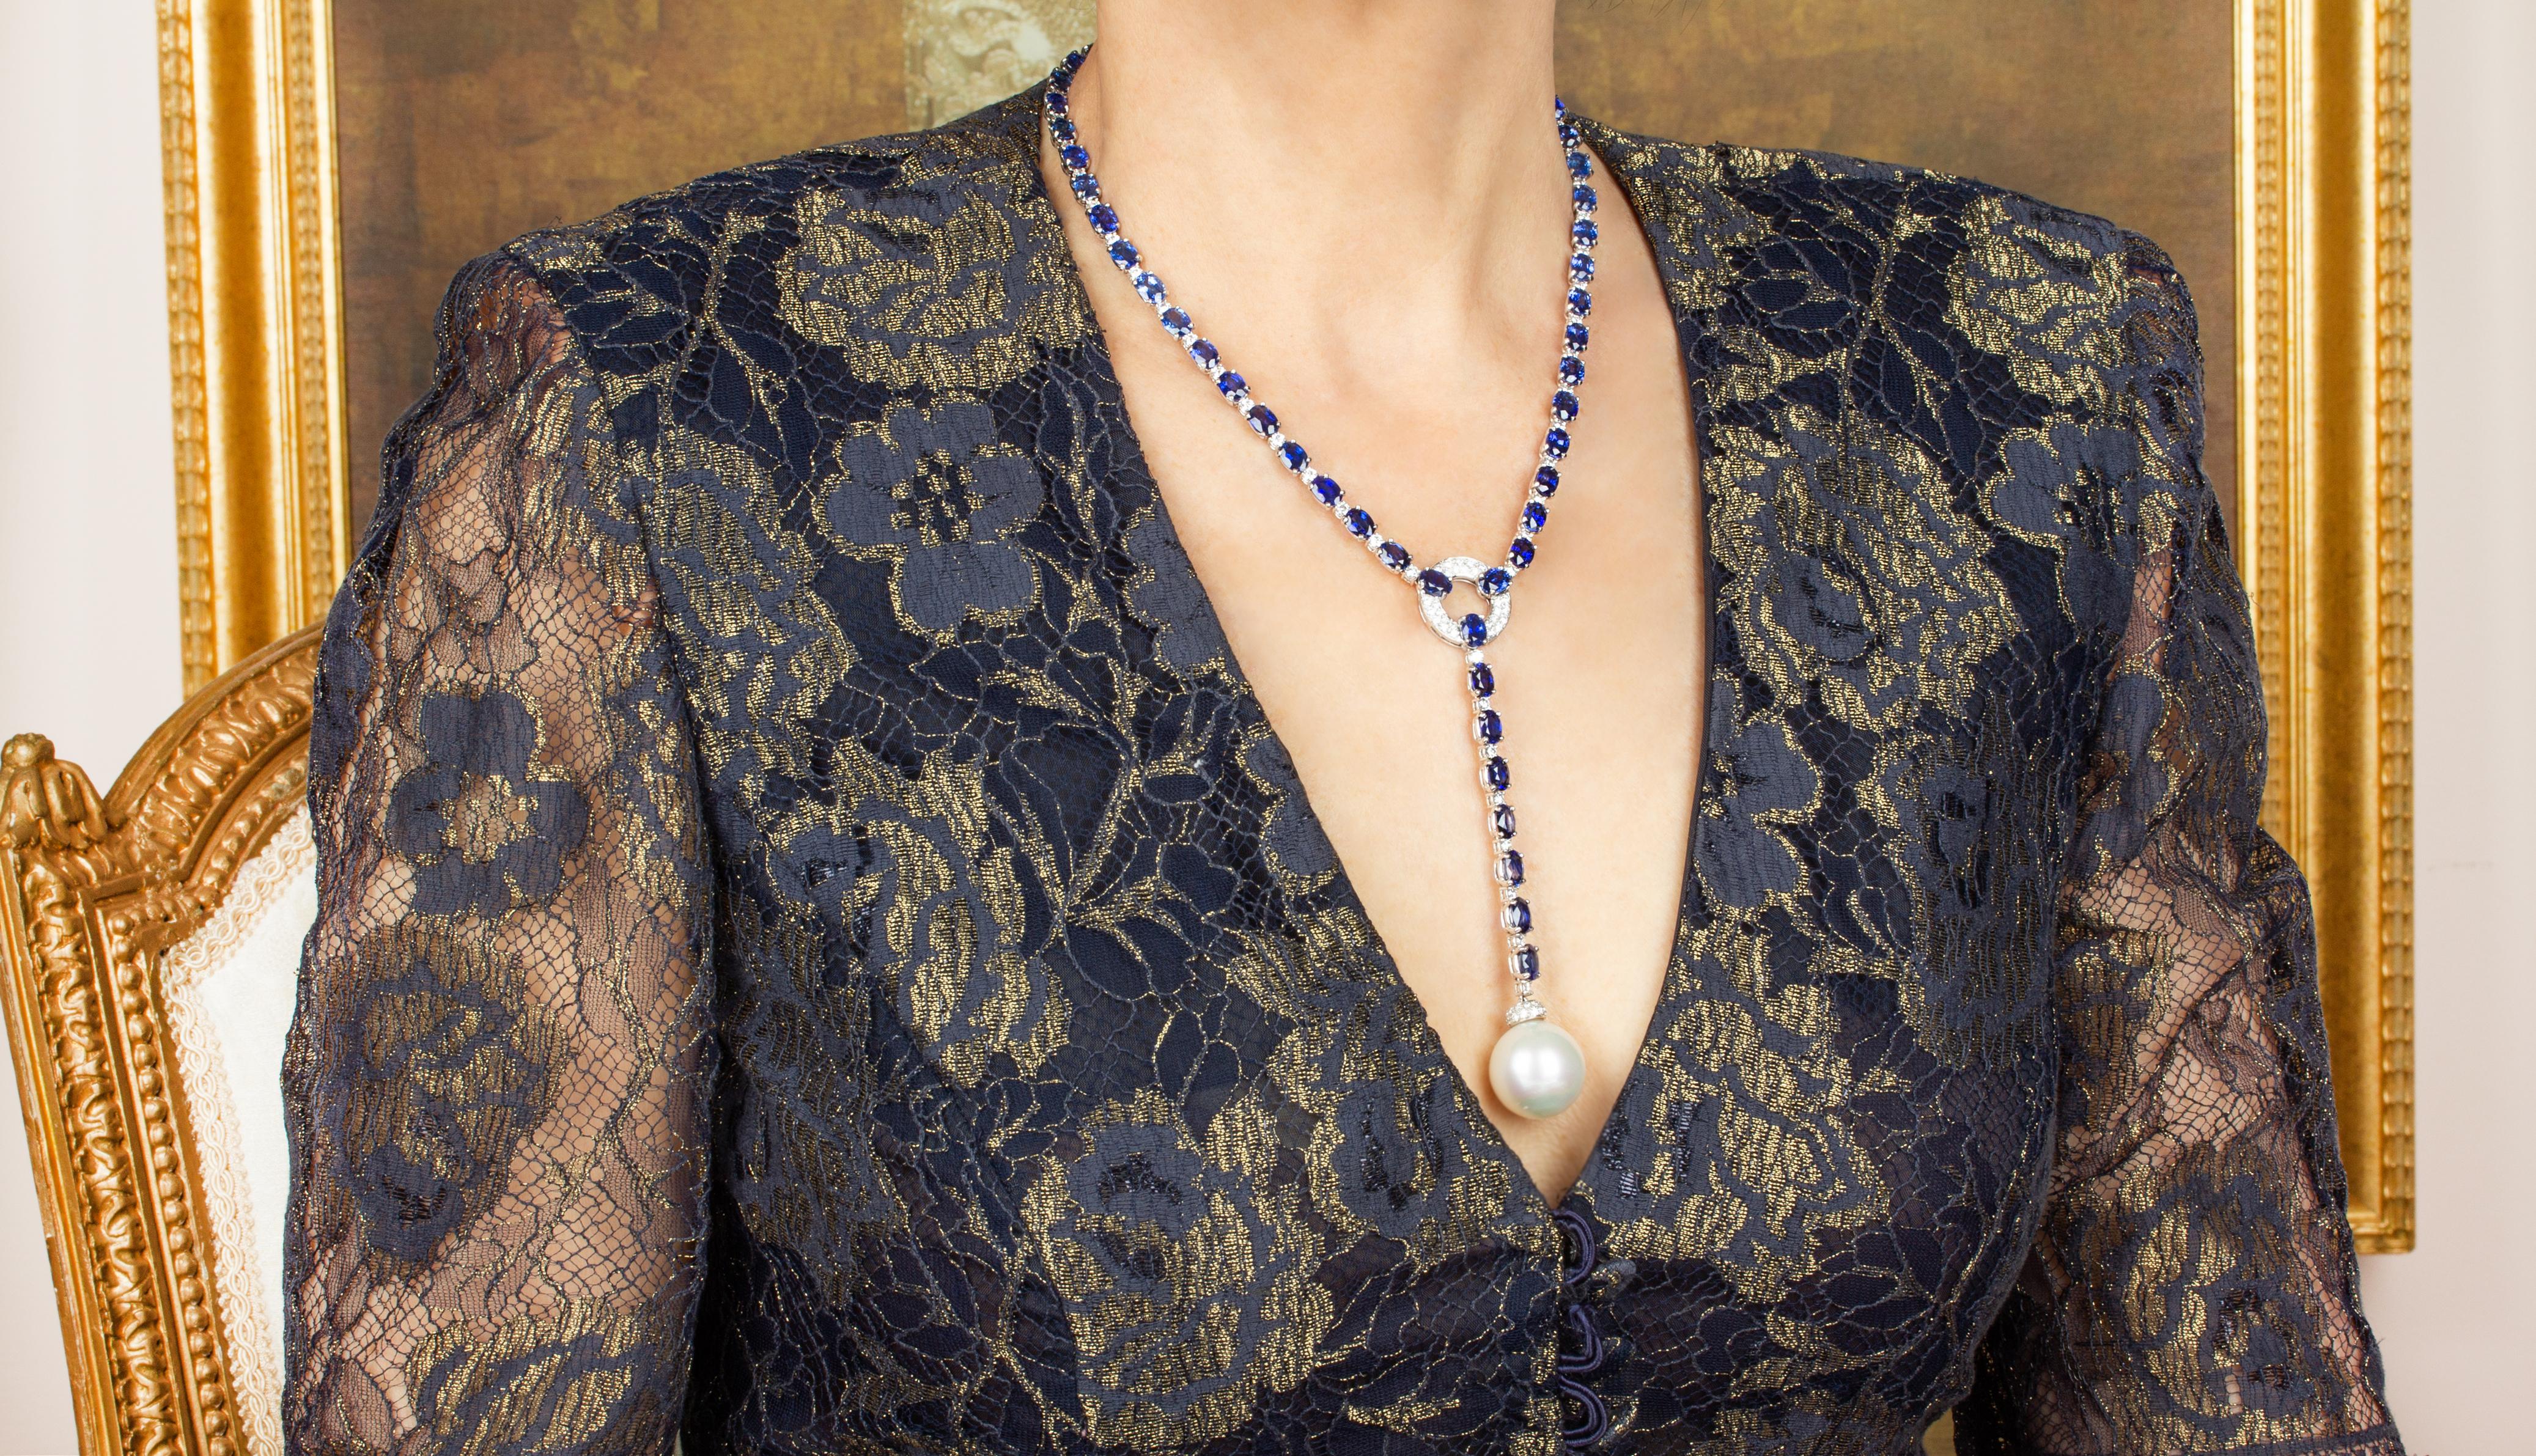 The necklace features 71.47 carats of brilliant faceted blue sapphires of oval cut laying perfectly on the neck. The splendid sapphires are interleaved with round diamonds of top quality (F/VVS) for a total of 5.75 carats. A magnificent Australian